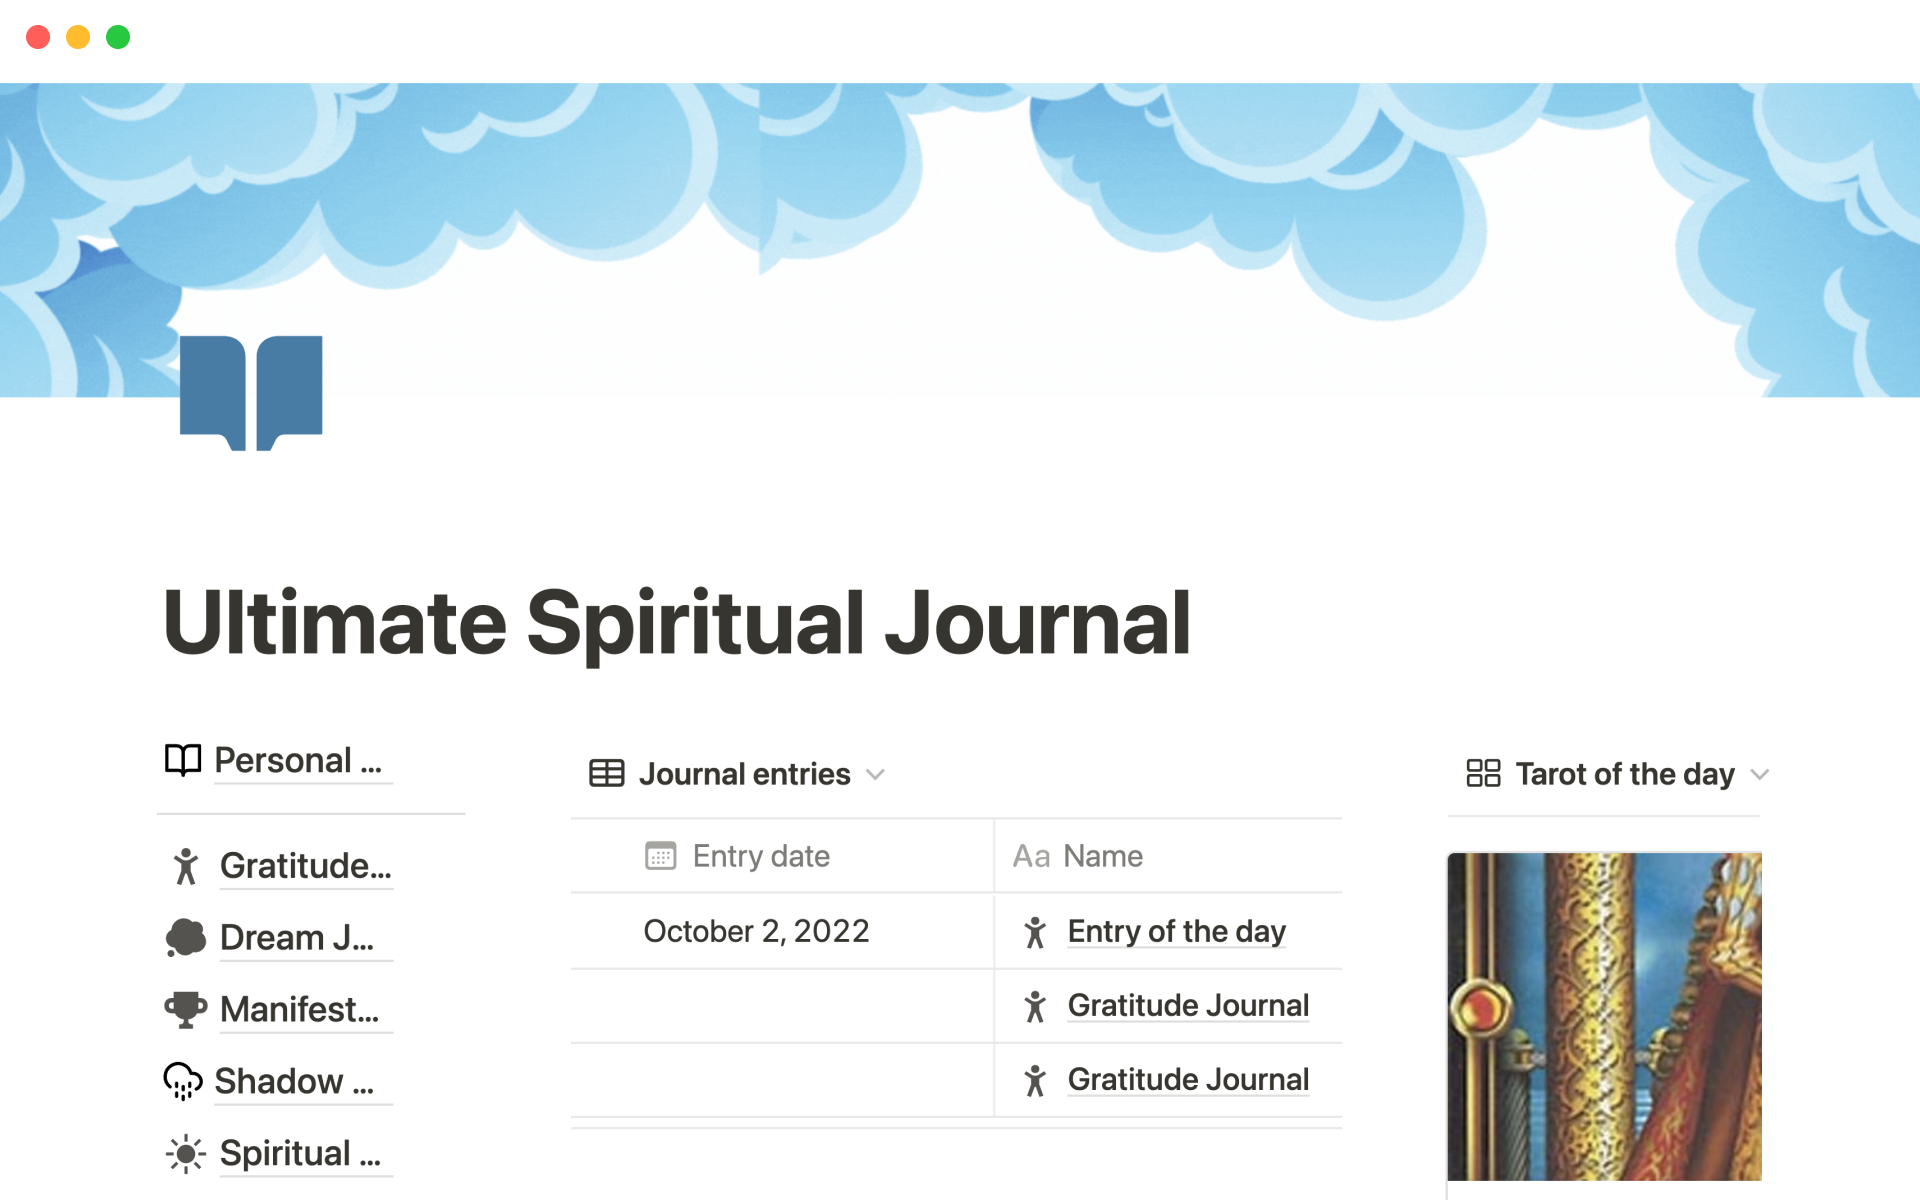 Improve your journaling experience in a way you've never thought possible with this lightweight and digital spiritual journal made with love in Notion.